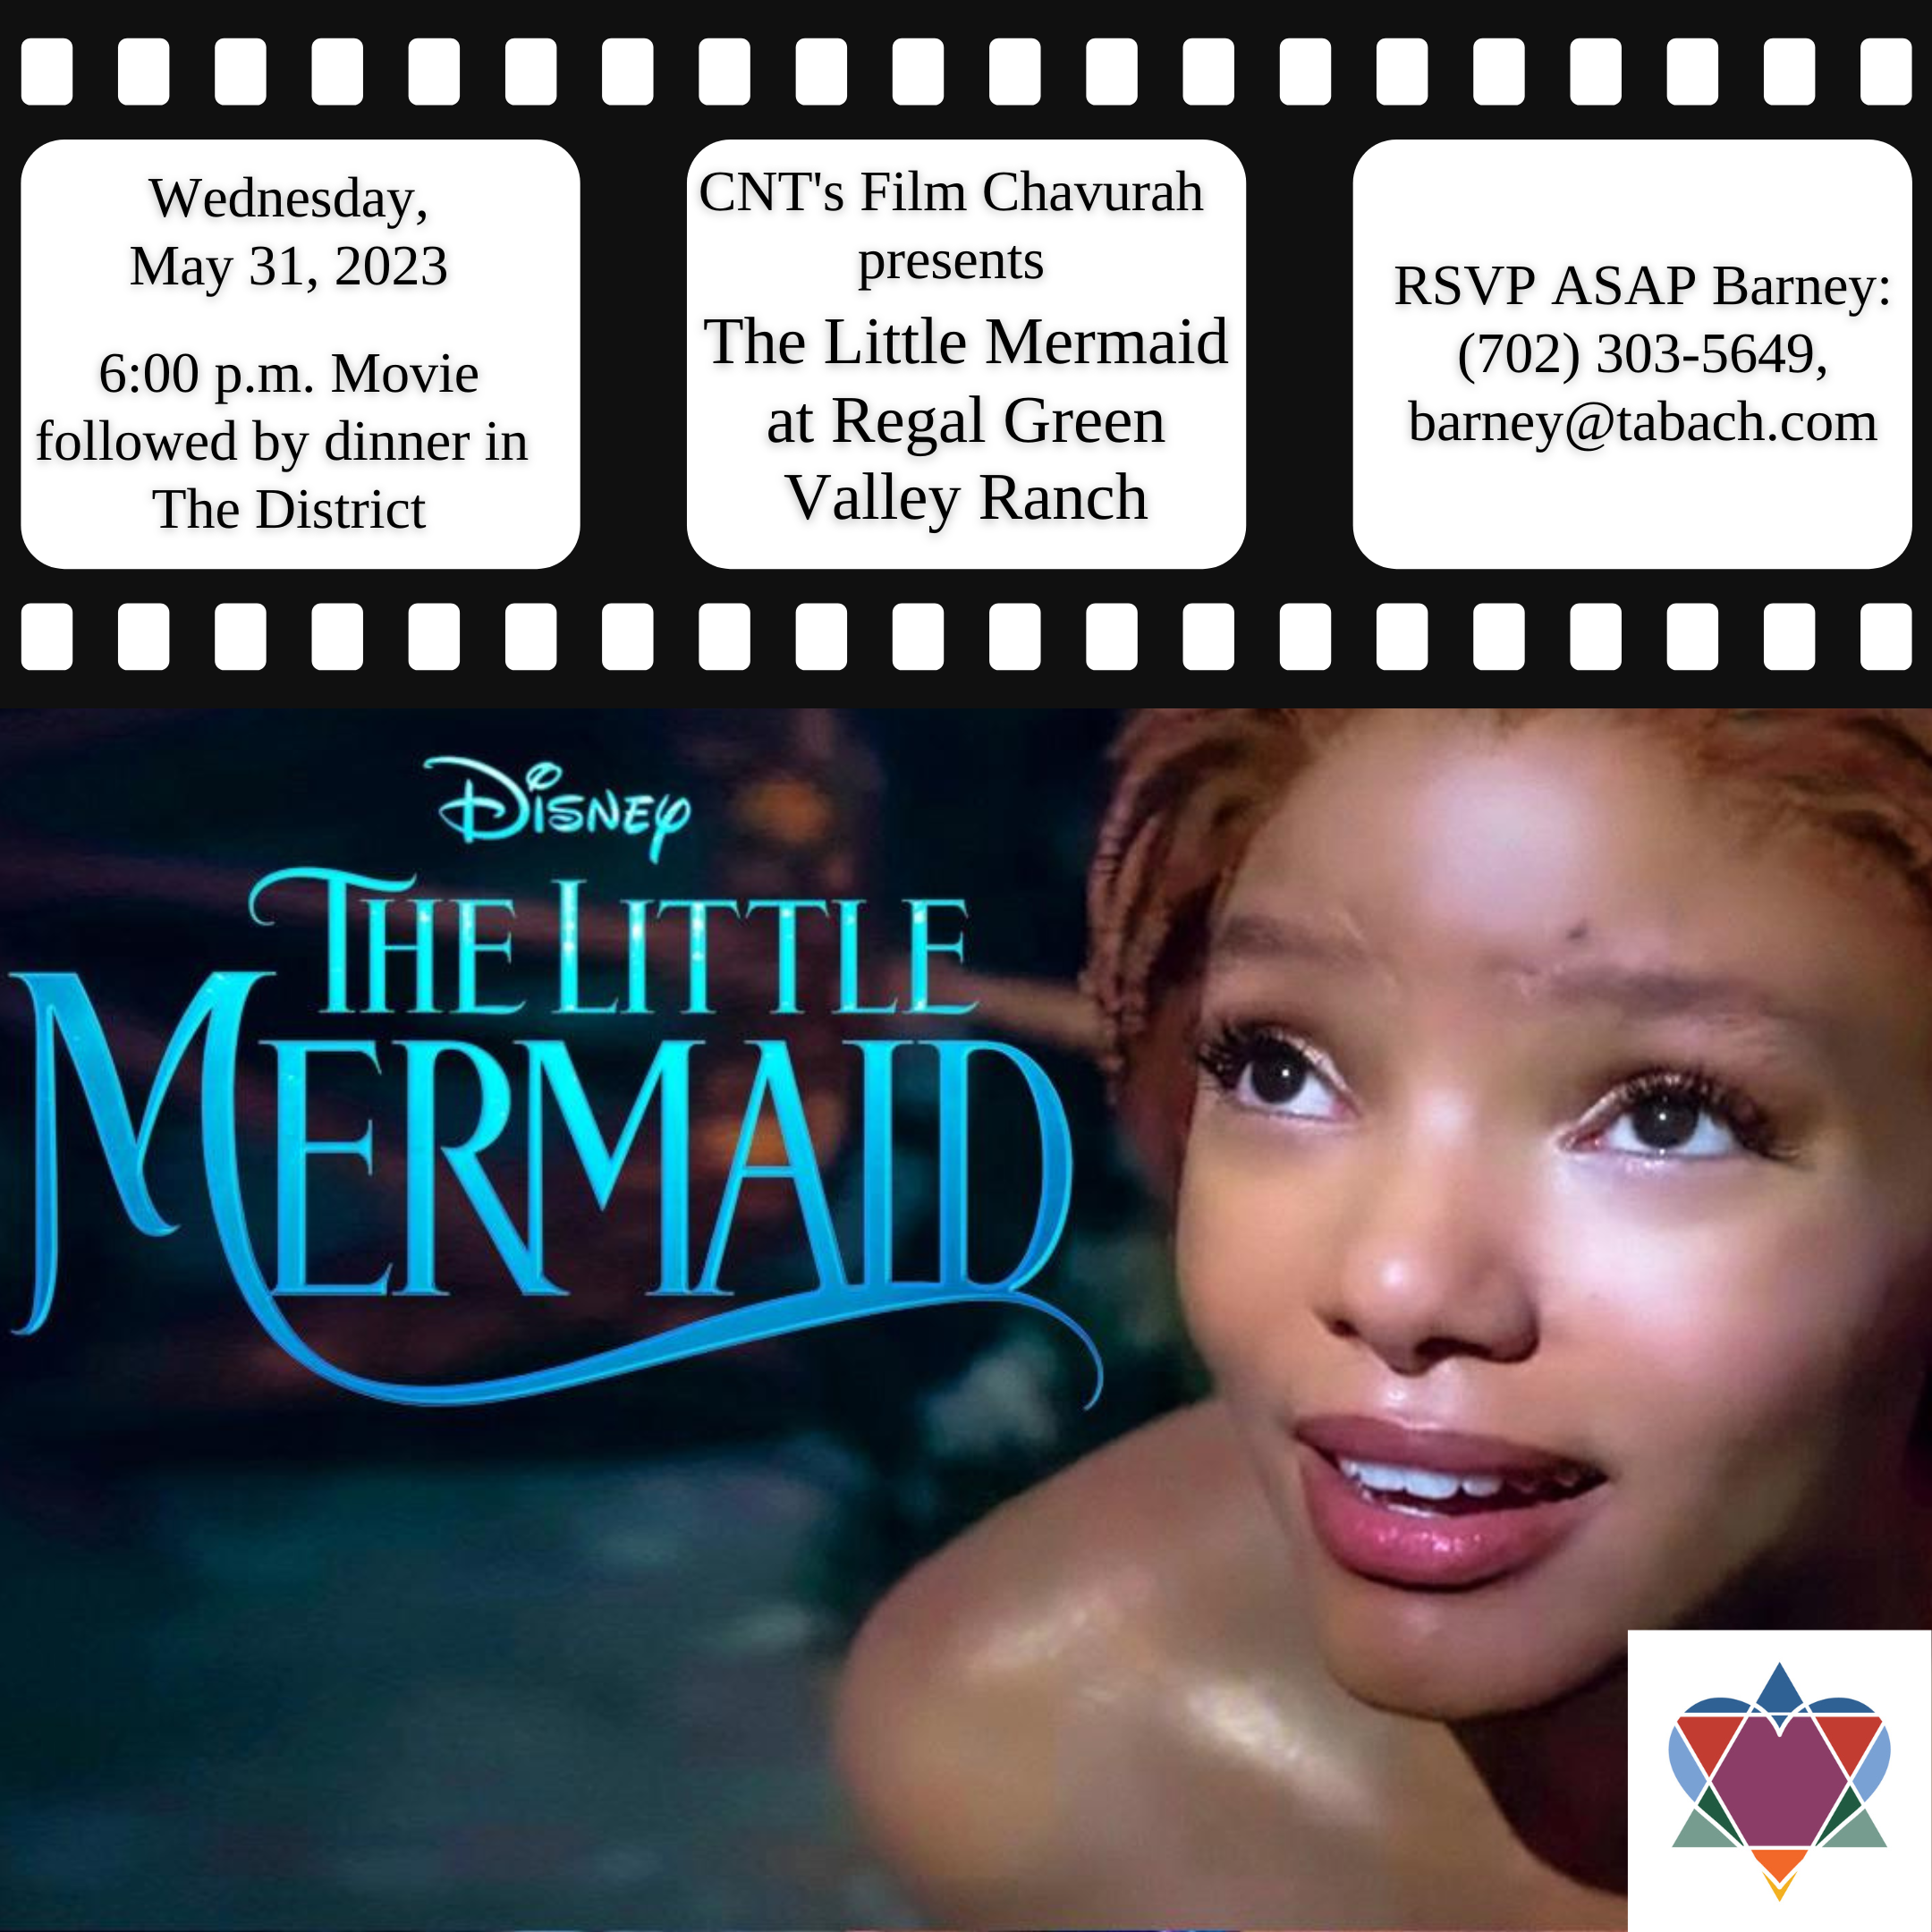 CNT'S FILM CHAVURAH TO SEE THE LITTLE MERMAID